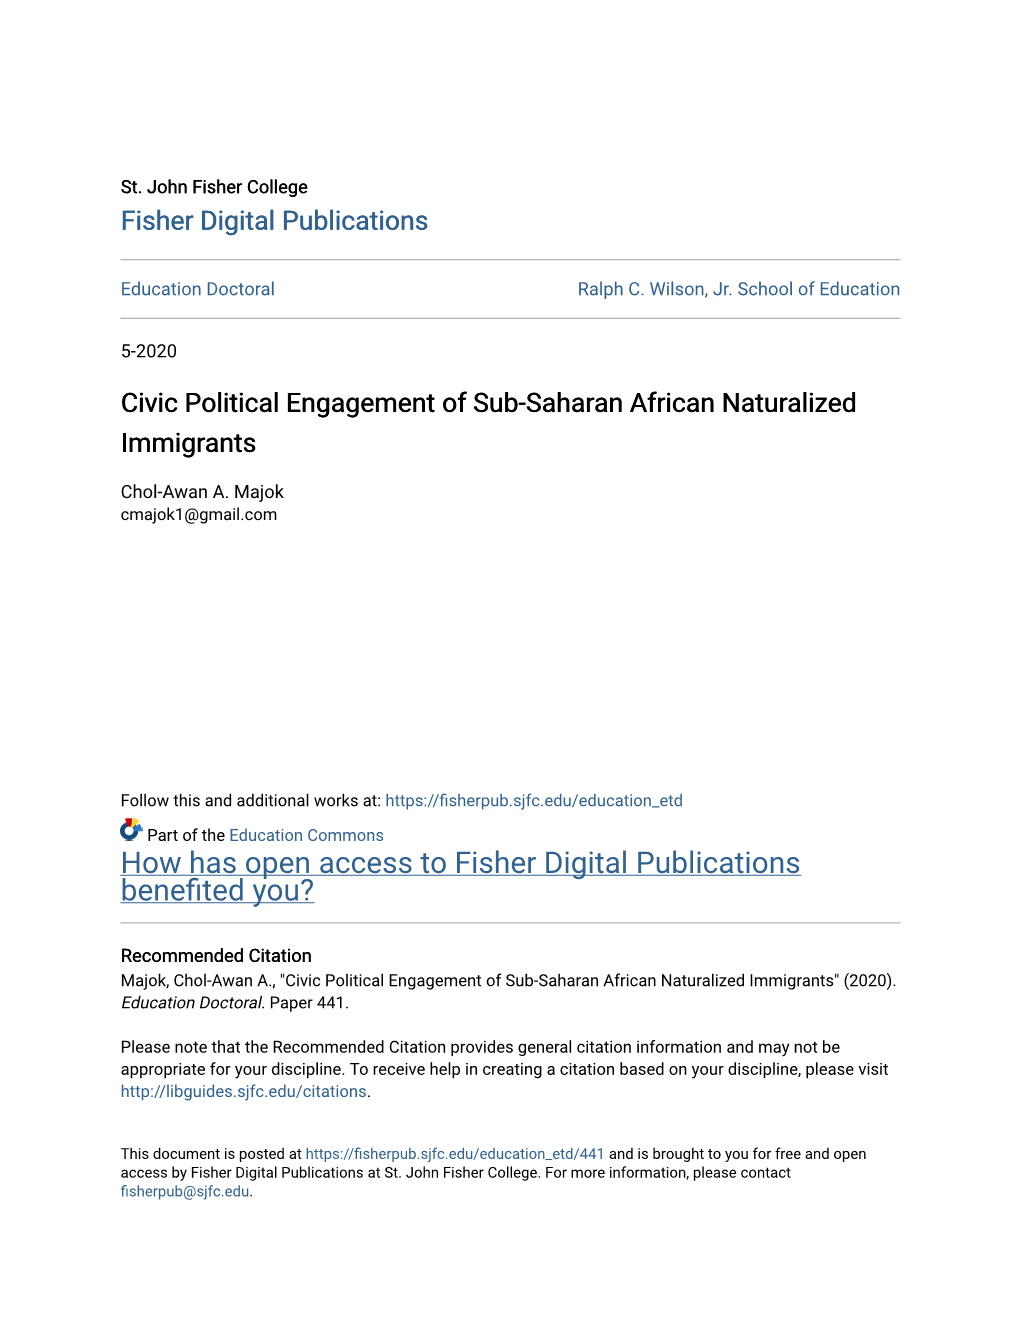 Civic Political Engagement of Sub-Saharan African Naturalized Immigrants